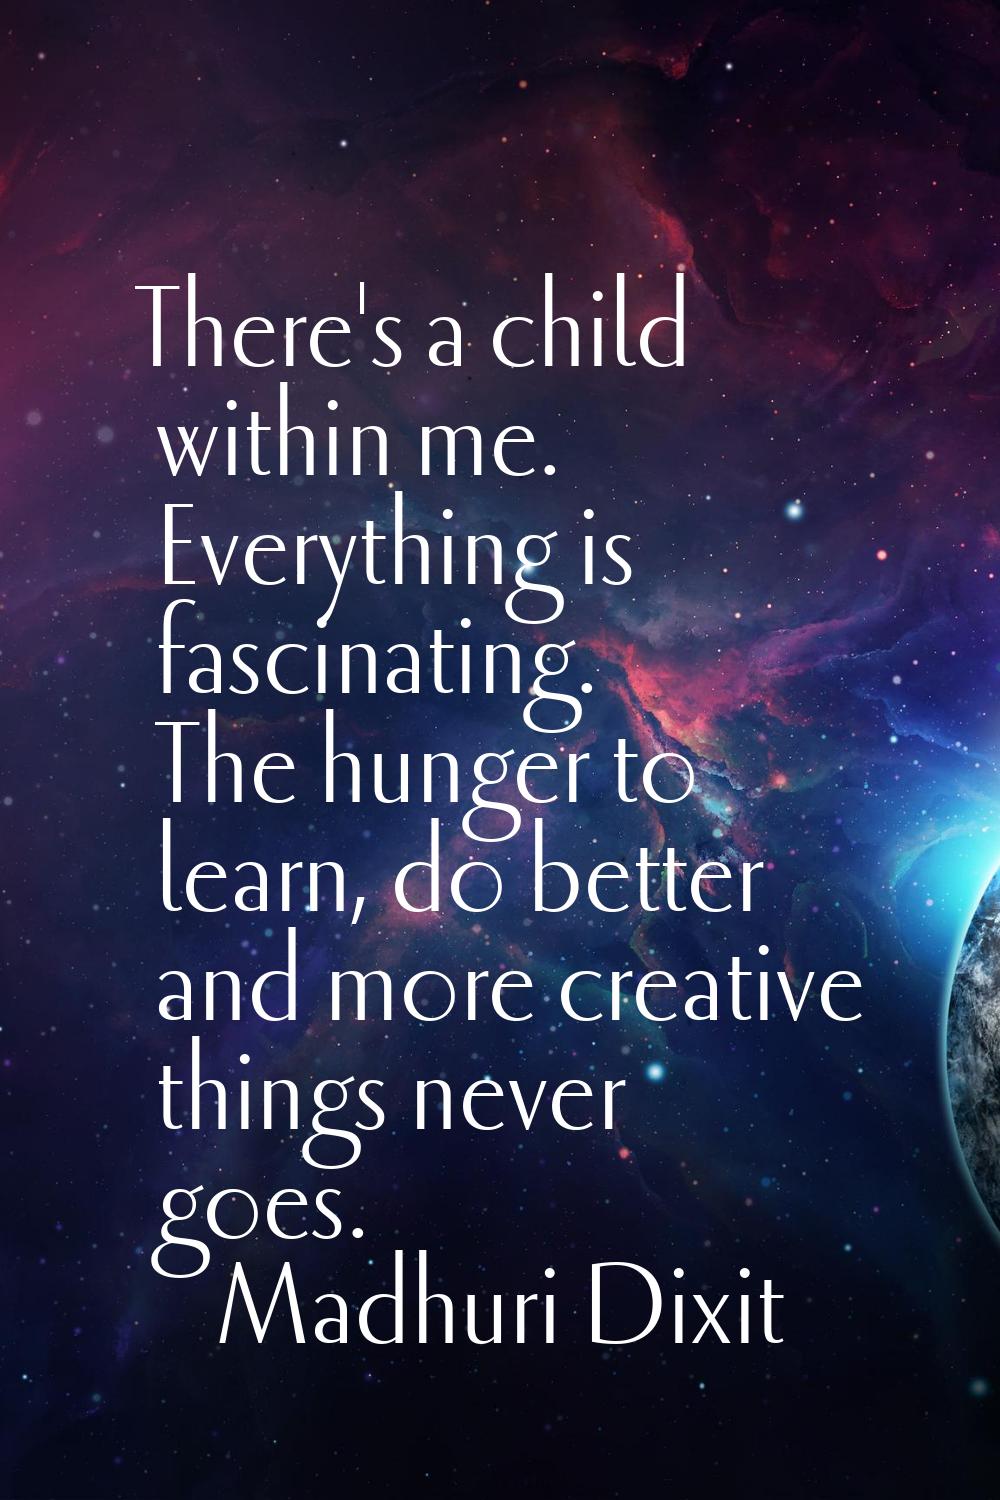 There's a child within me. Everything is fascinating. The hunger to learn, do better and more creat